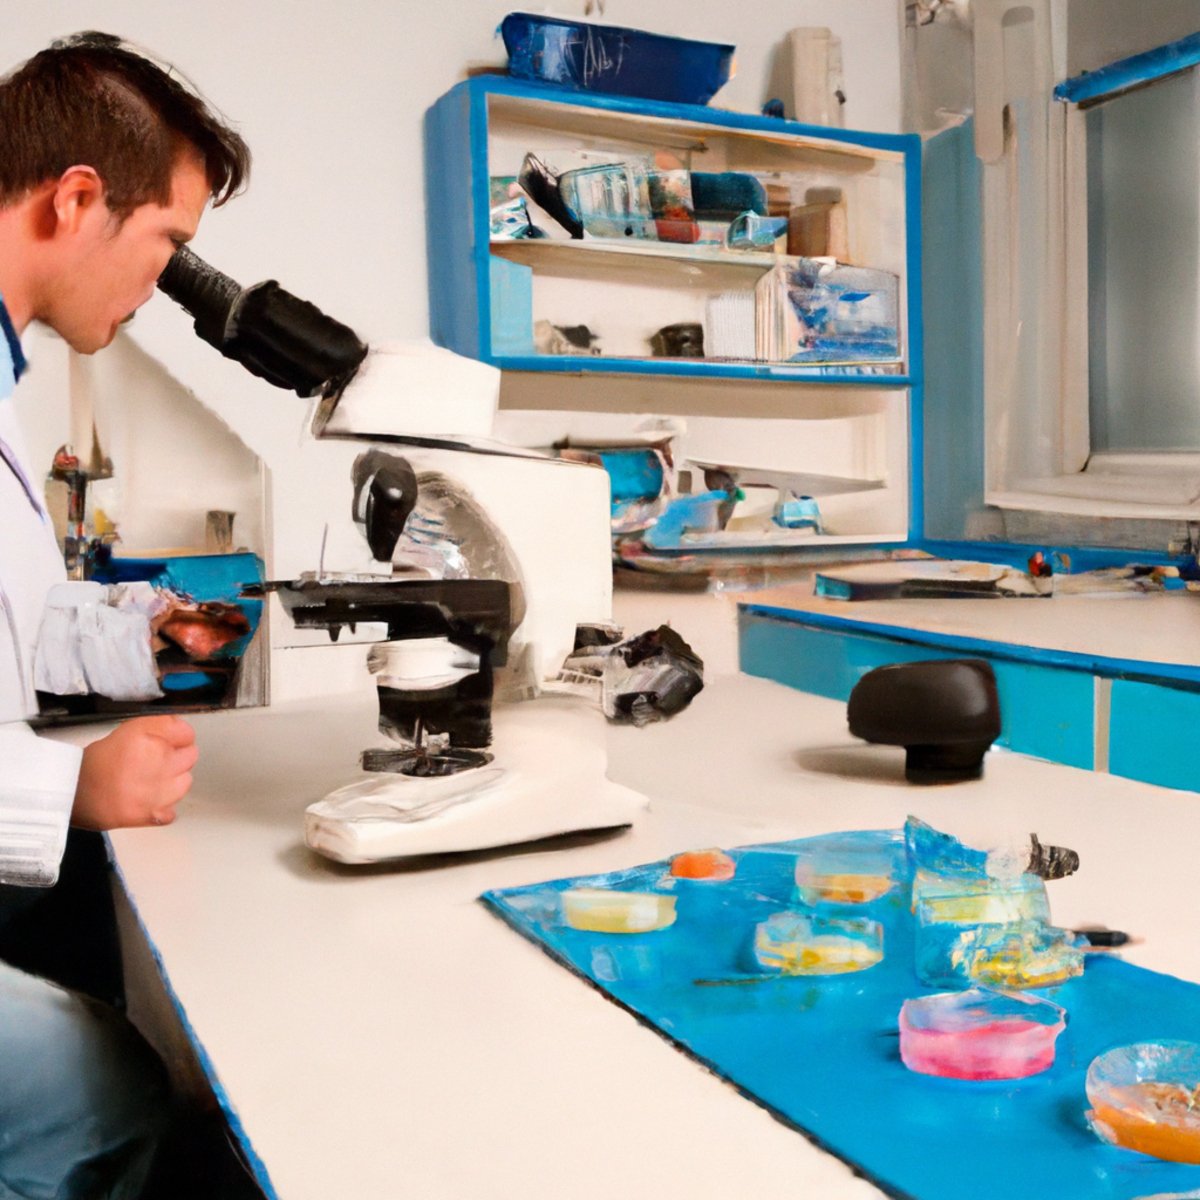 Scientific laboratory with instruments and equipment for Trimethylaminuria research -Trimethylaminuria (Fish Odor Syndrome)